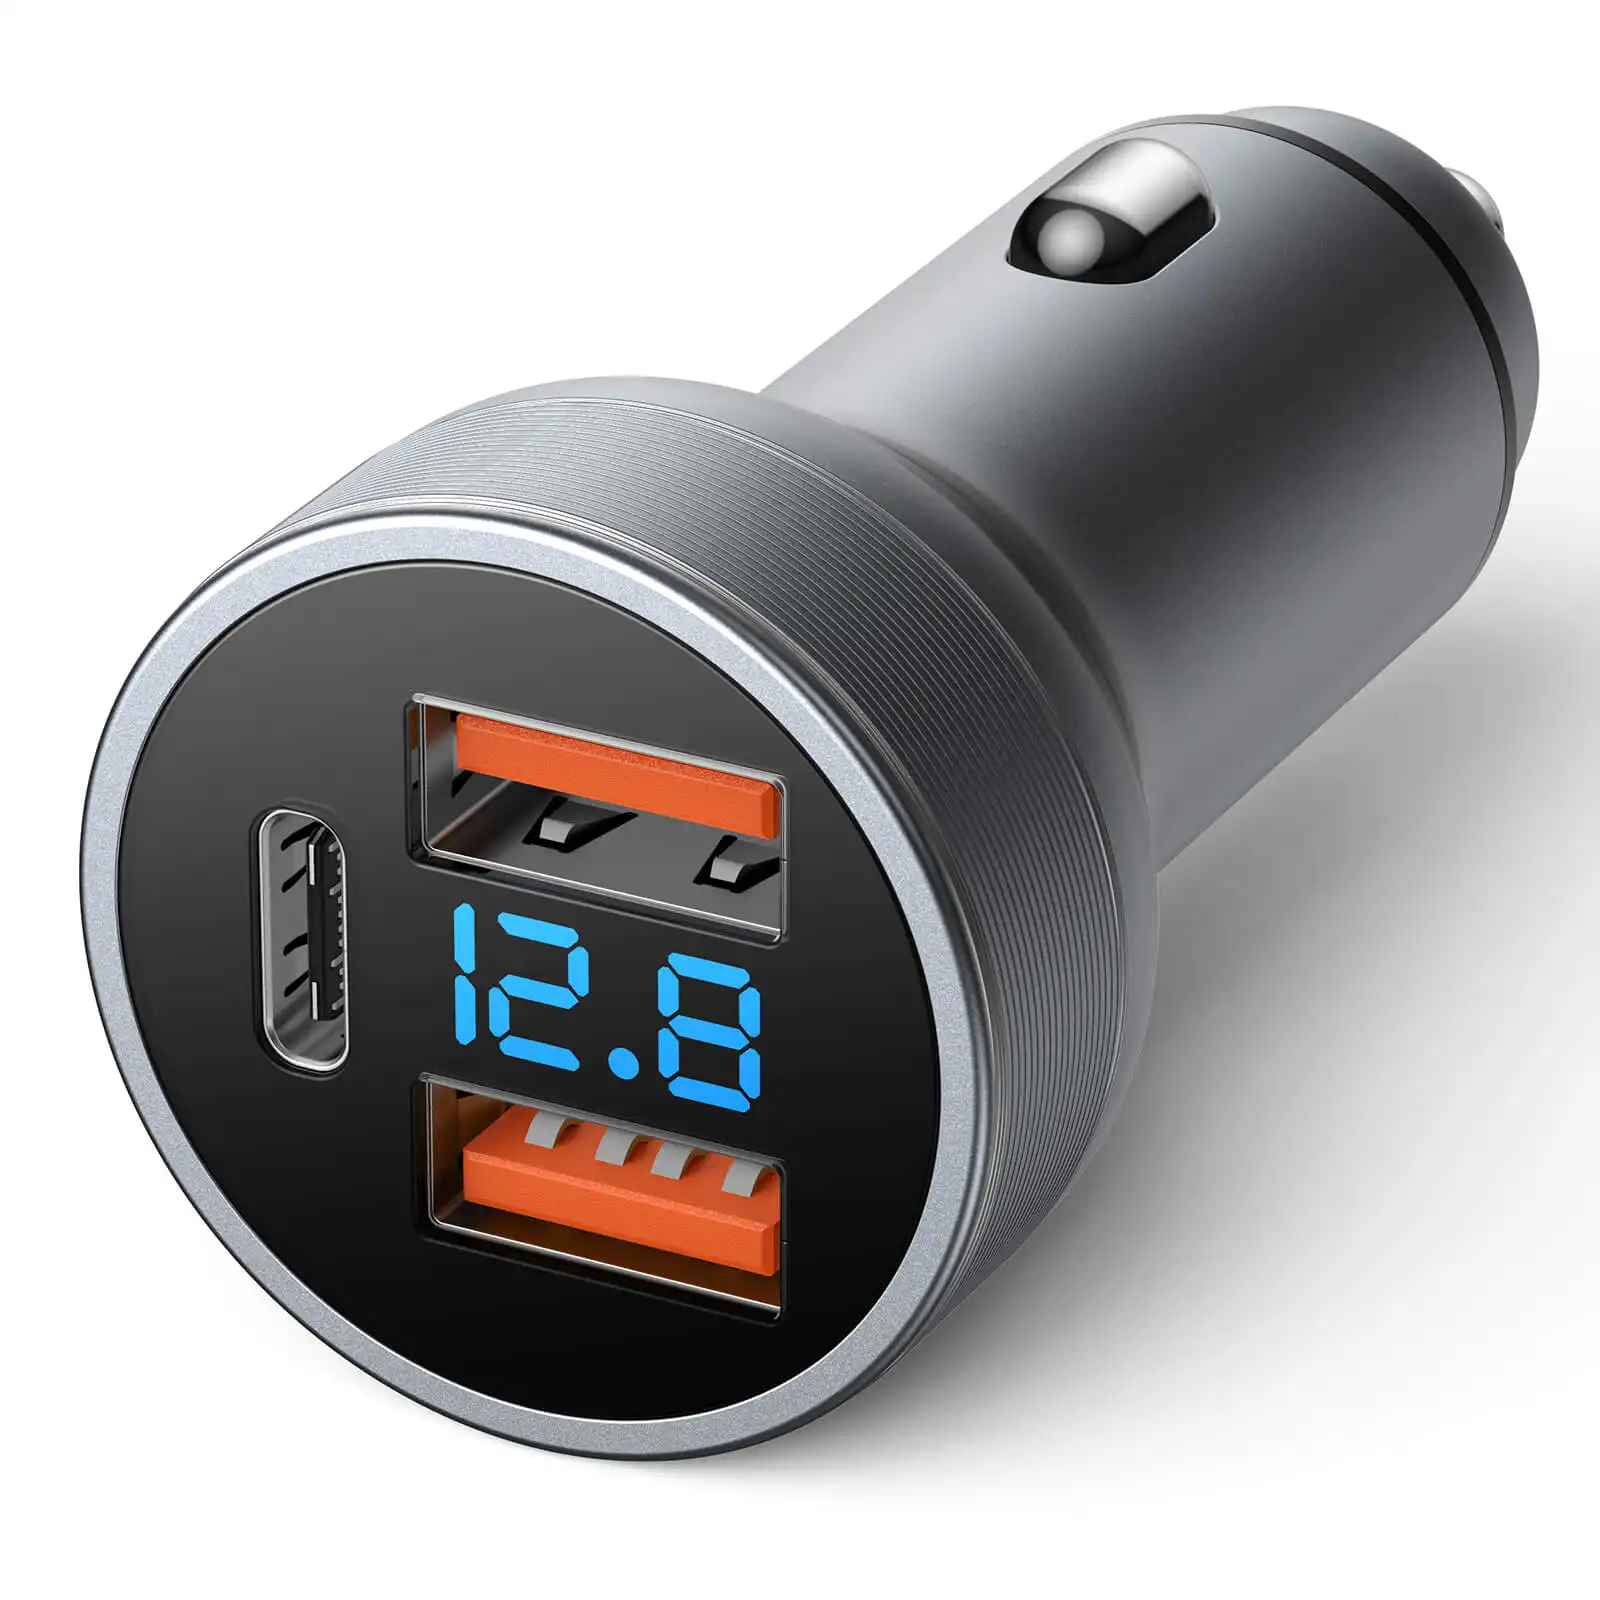 Hot Sales 3 Port USB Car Charger 54W Aluminum alloy fast charging Type-C PD 36W dual port QC 3.0 18W Fast led power Car Charger